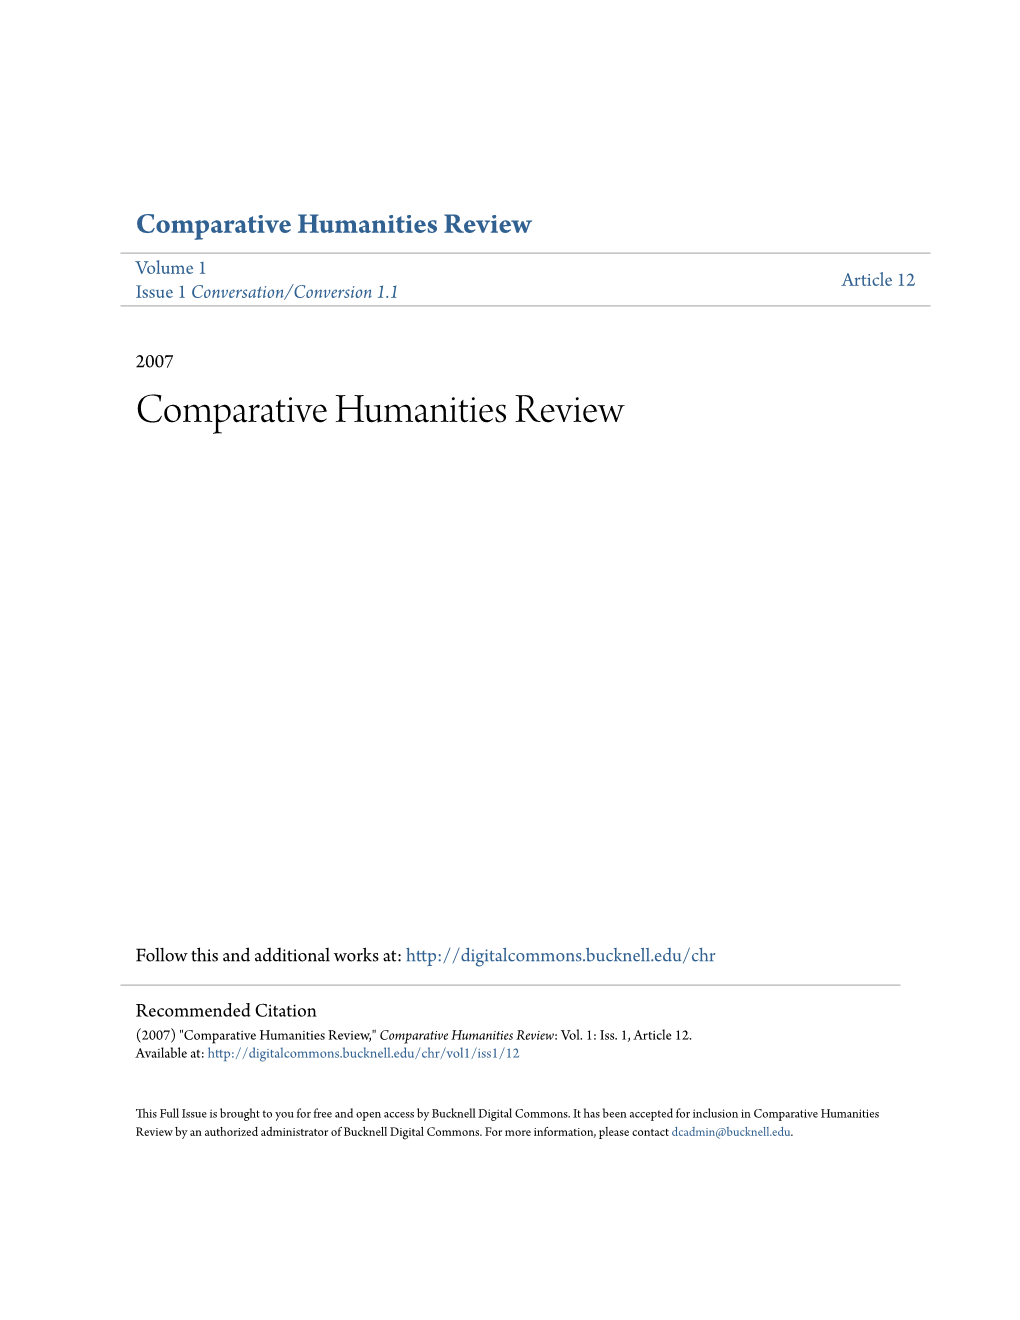 Comparative Humanities Review Volume 1 Article 12 Issue 1 Conversation/Conversion 1.1